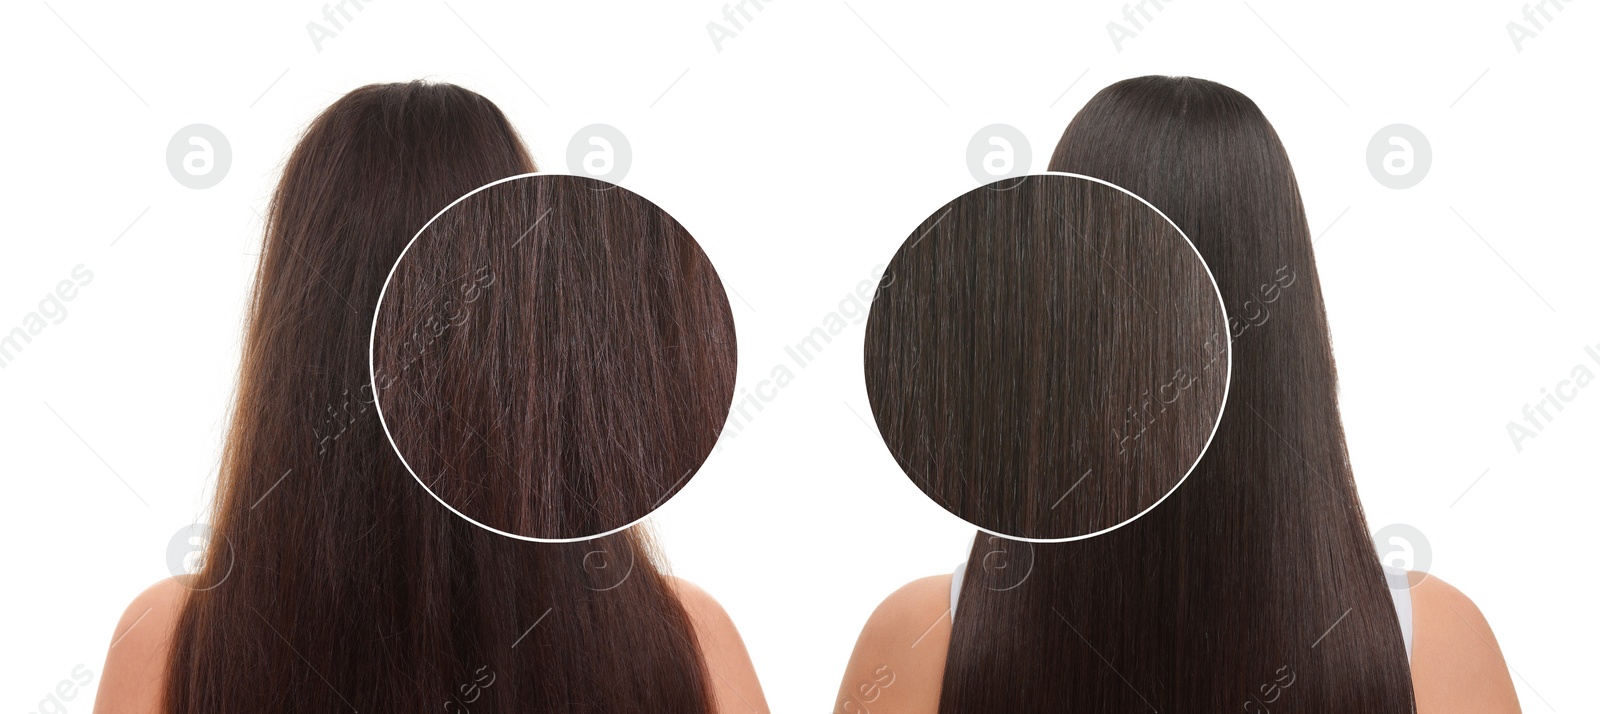 Image of Collage with photos of woman before and after hair treatment on white background, back view. Zoomed area showing damaged and healthy strand